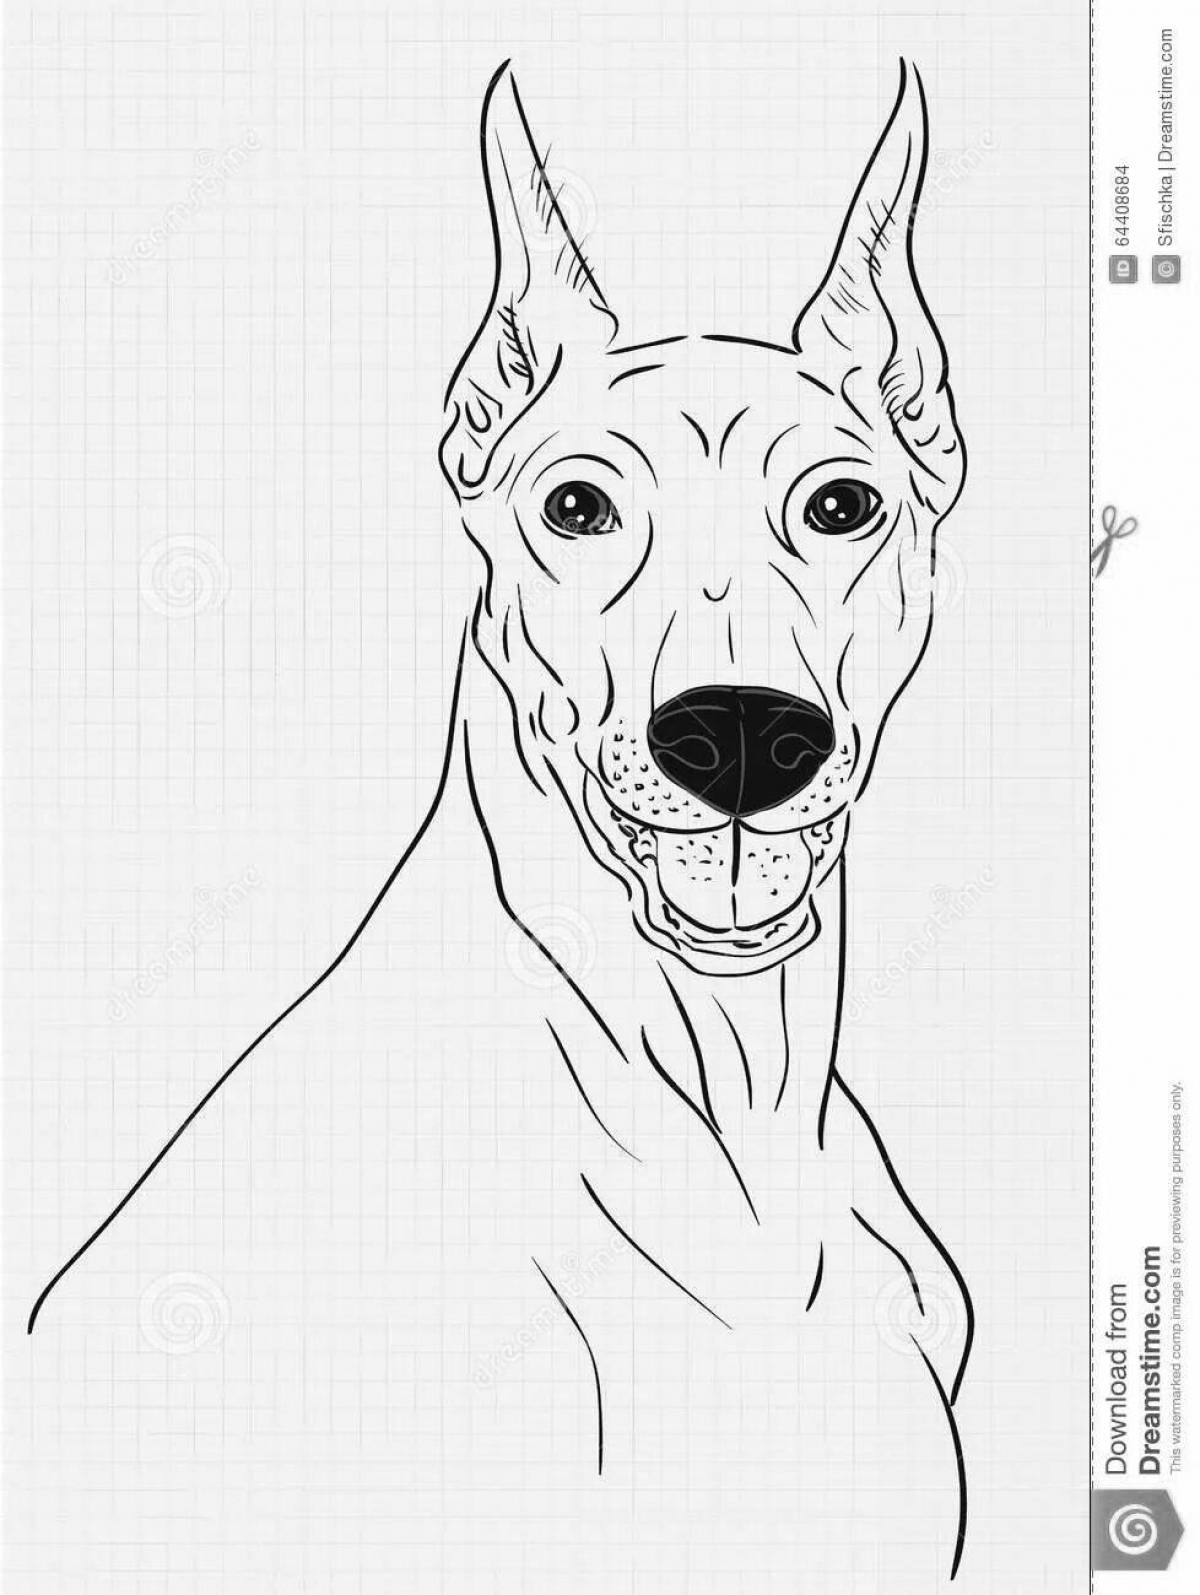 Colorful doberman dog coloring page